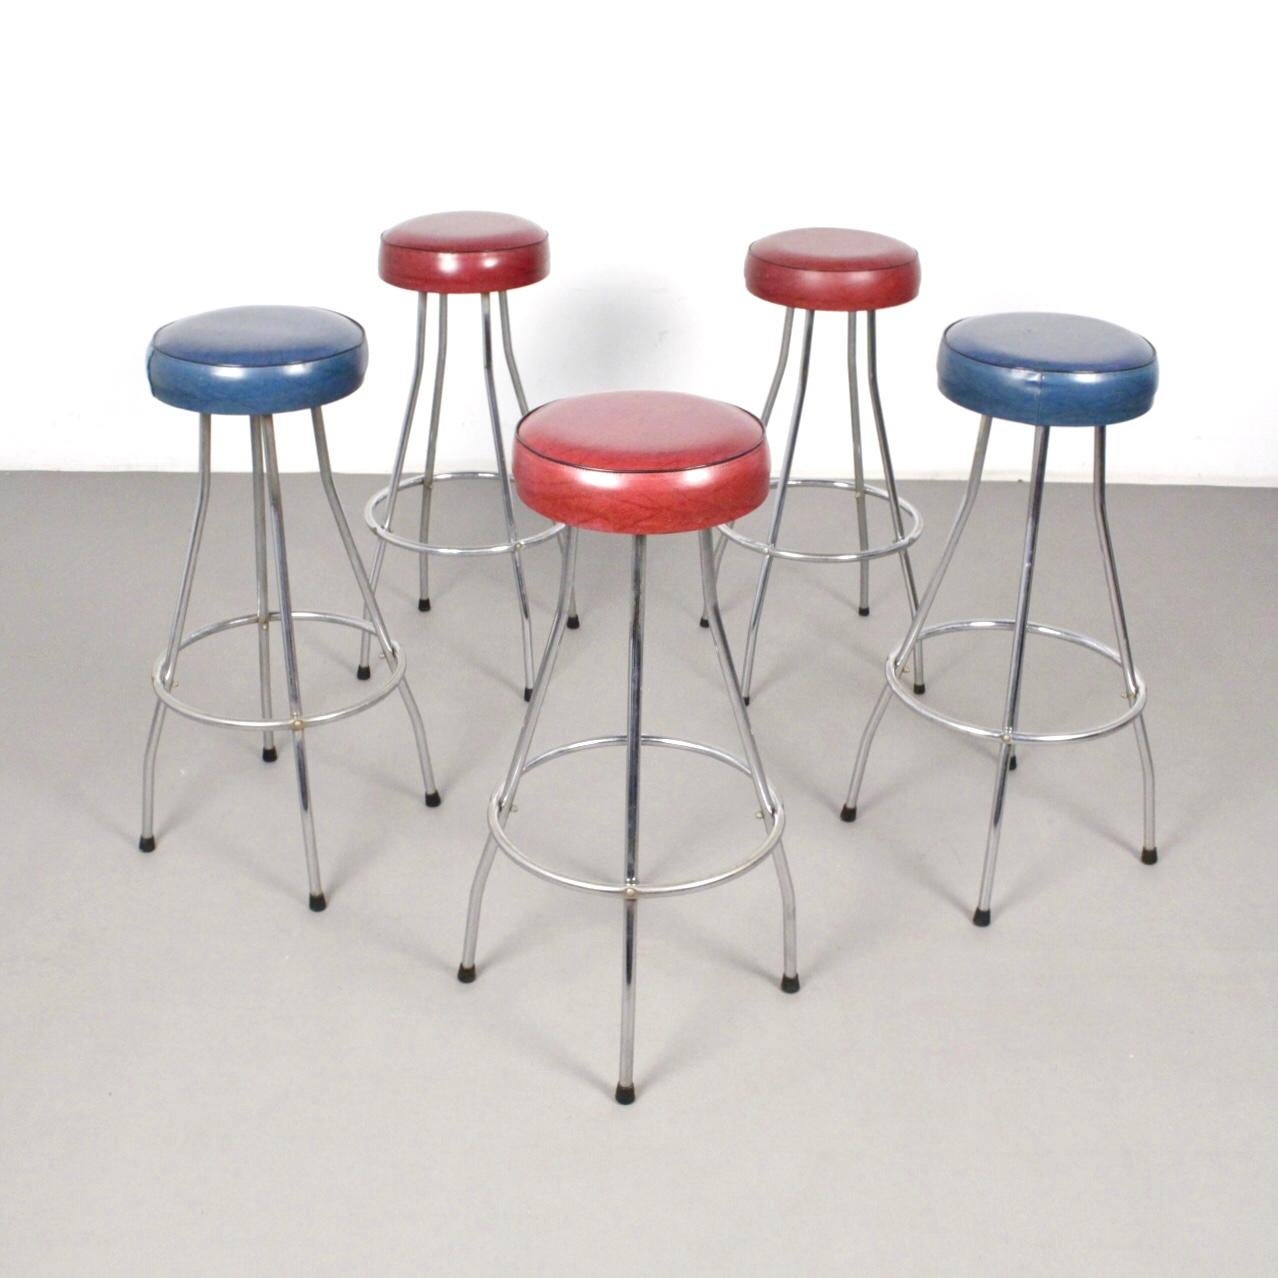 Scandinavian midcentury bar stools made in chromed tubular steel frame. Red (3) and blue (2) skai leather upholstered seats.